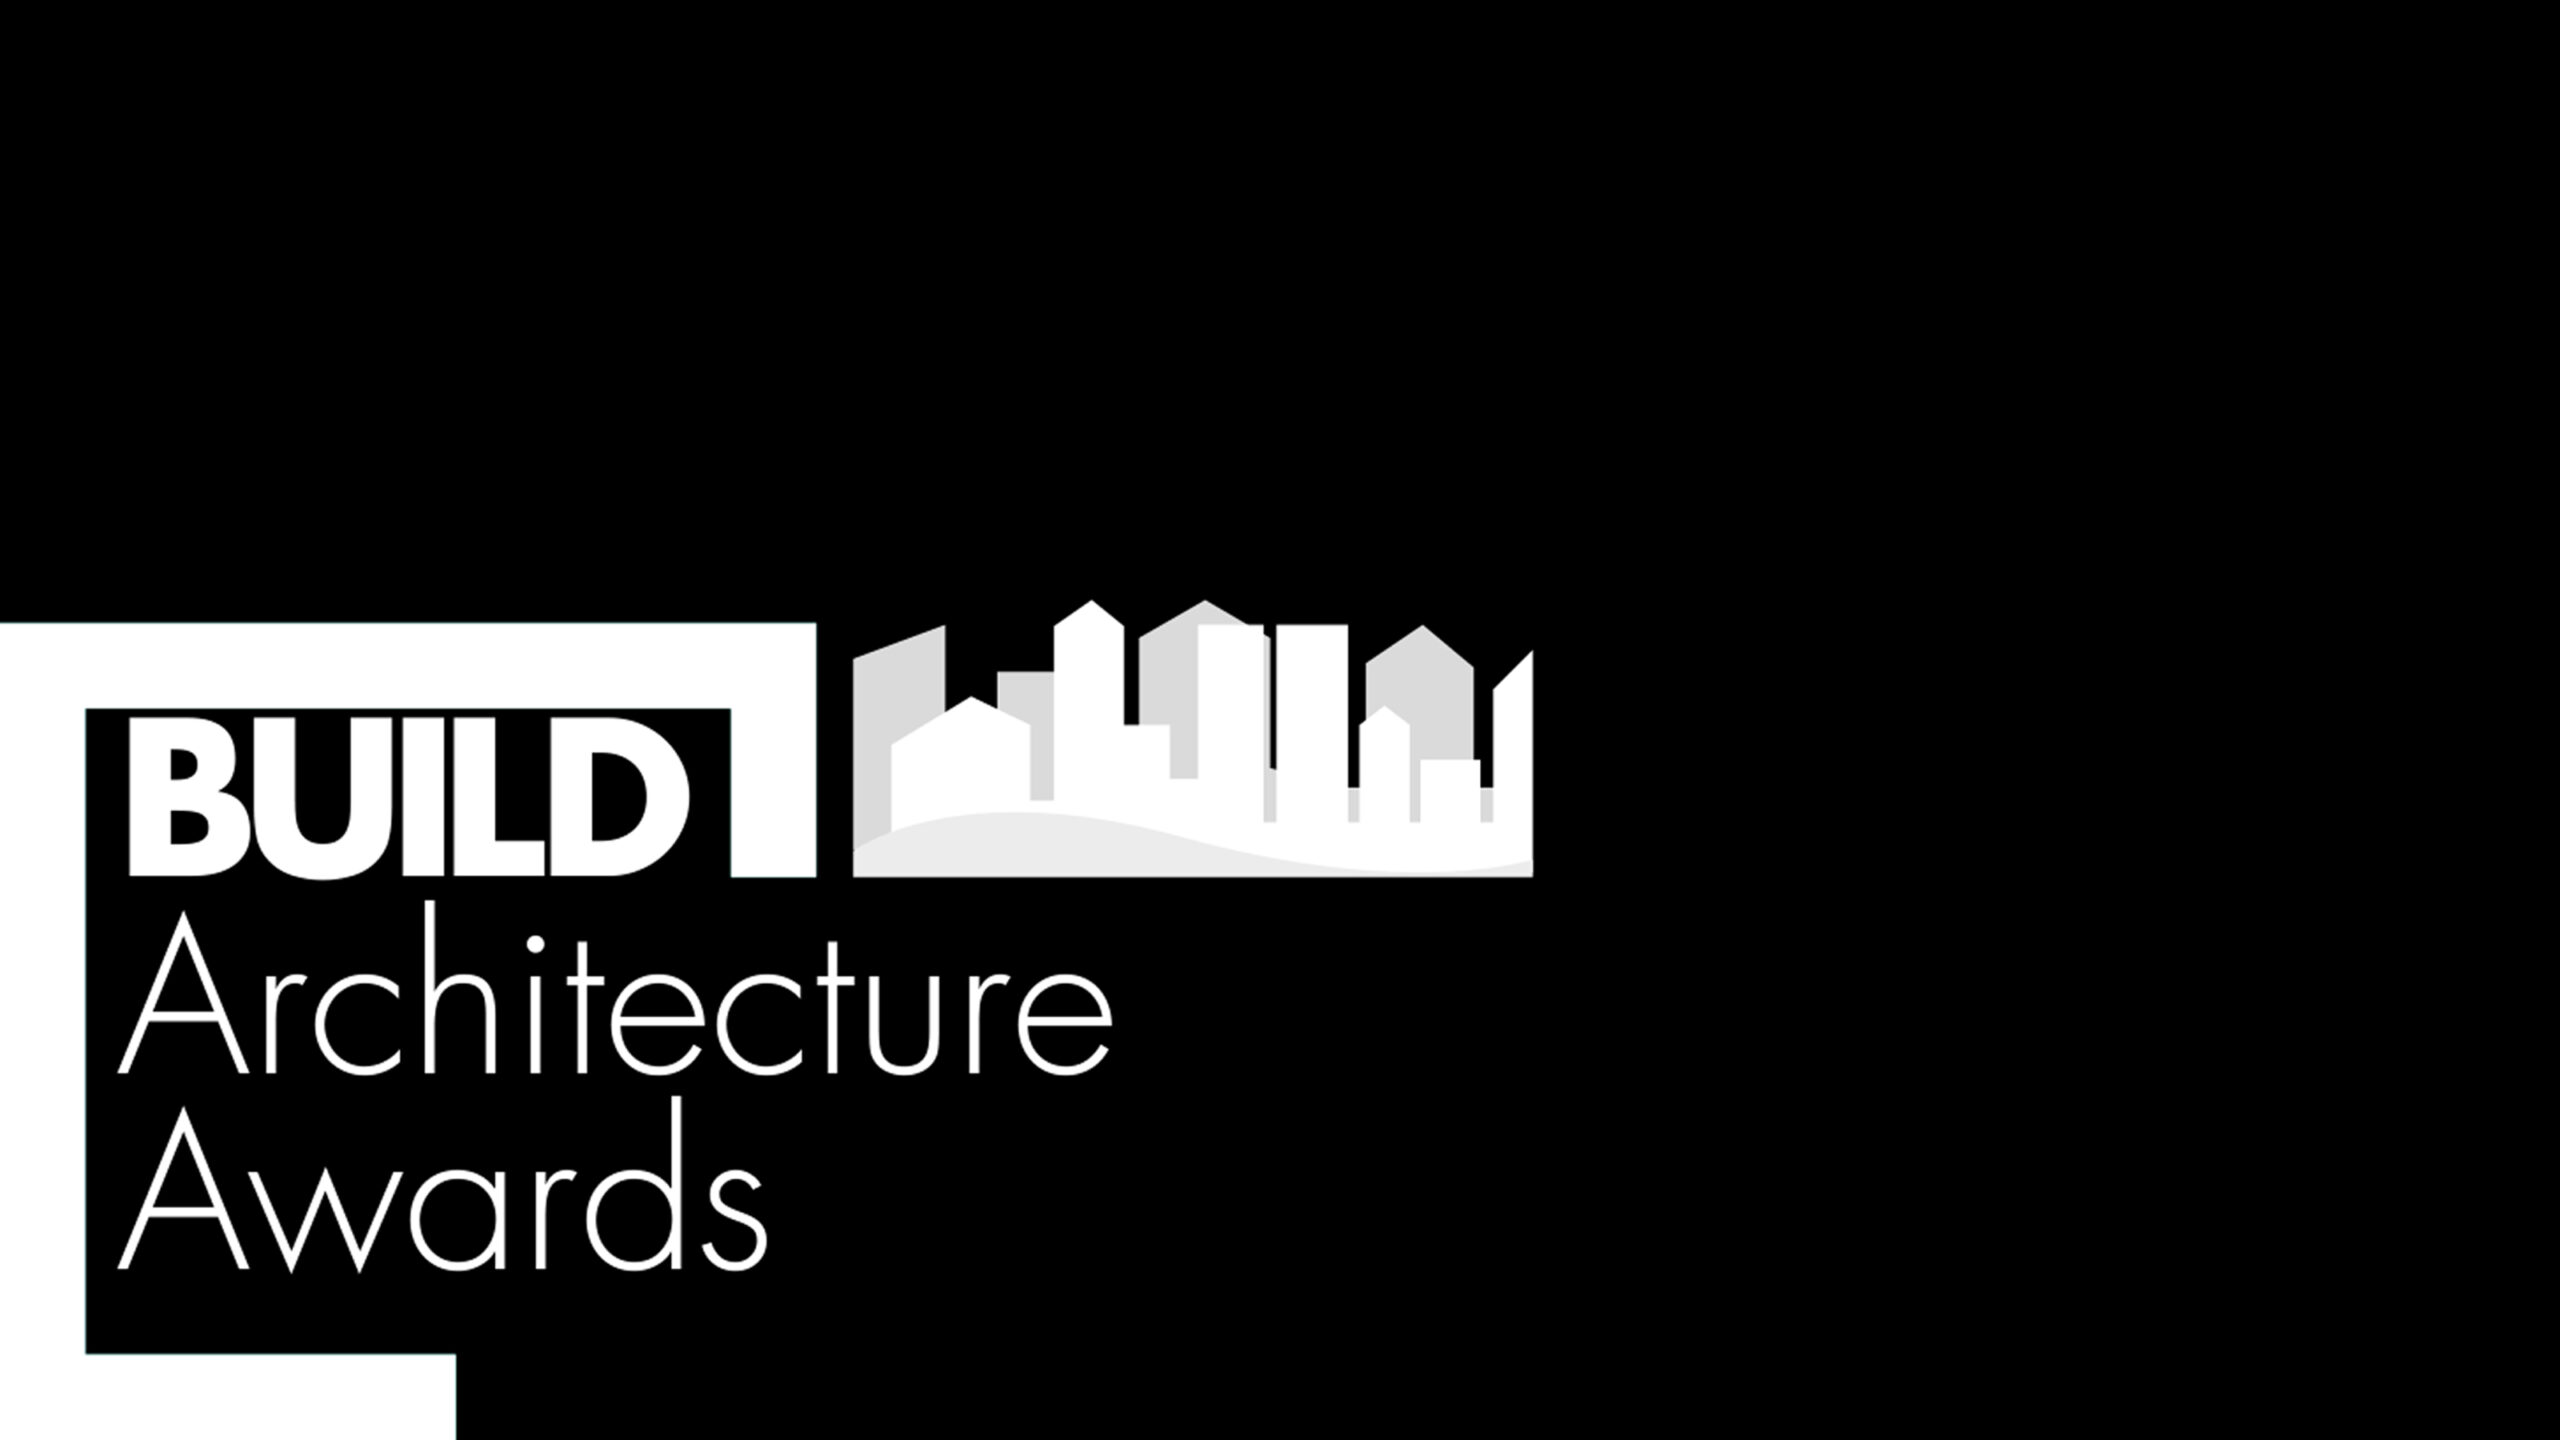 MASK Architects has been received 2 awards from BUILD ARCHITECTURE AWARDS 2021